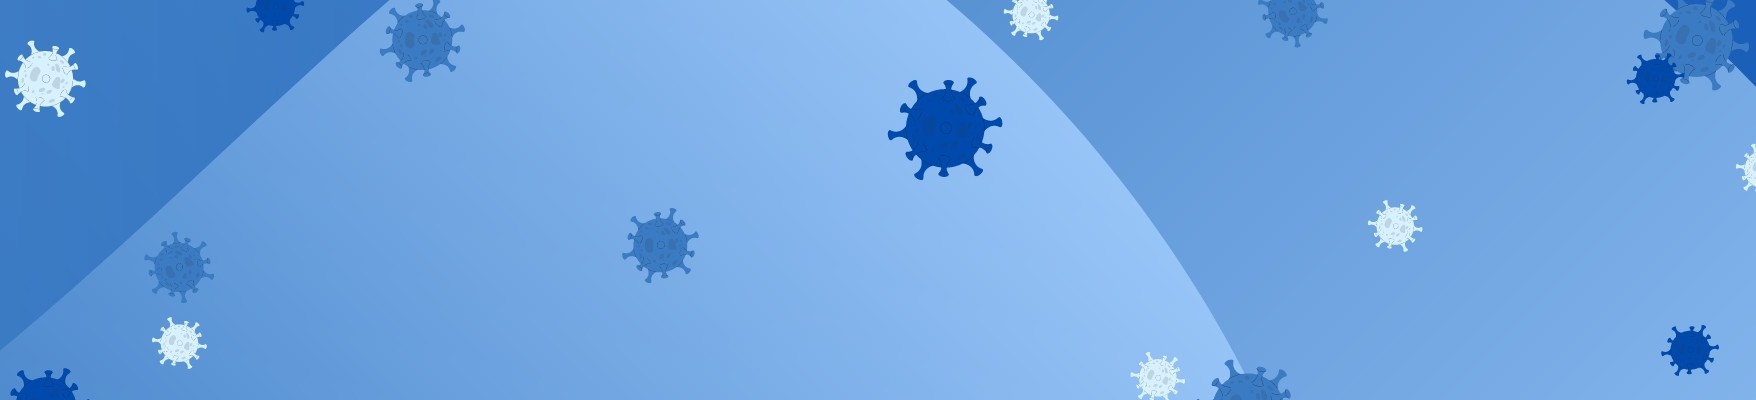 Small viruses floating on a blue background